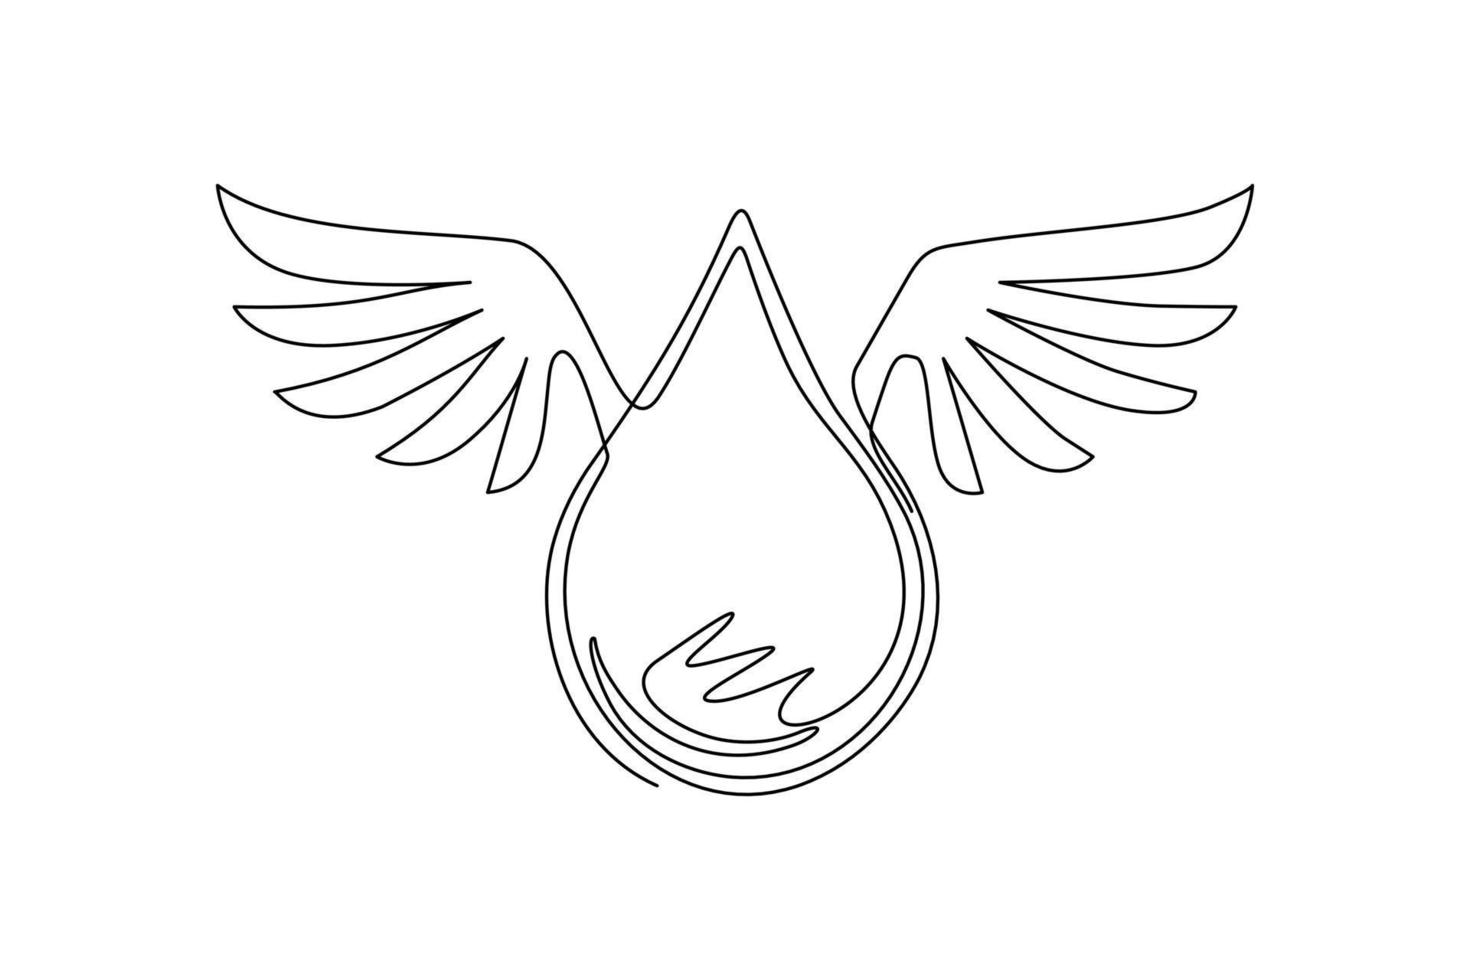 Single continuous line drawing water drop cartoon character with wings world water day banner concept. Winged water droplet isolated flat icon. Dynamic one line draw graphic design vector illustration